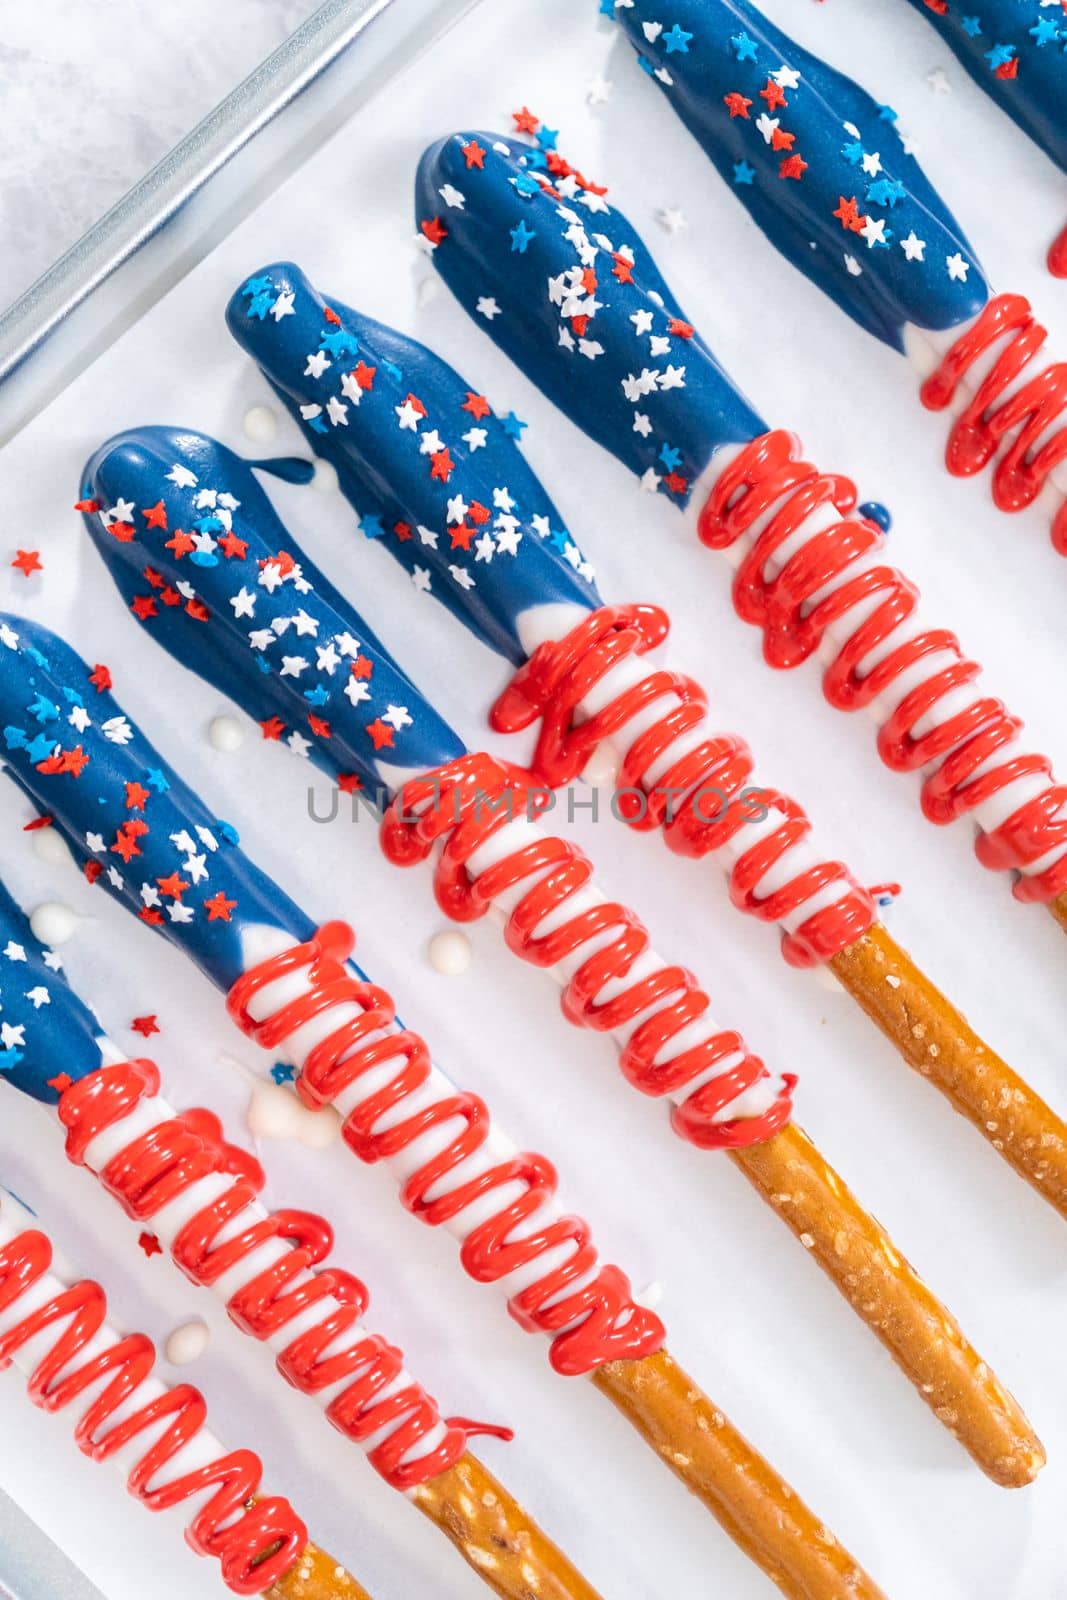 Homemade chocolate-covered pretzel rods decorated like the American flag drying on a baking sheet lined with parchment paper.